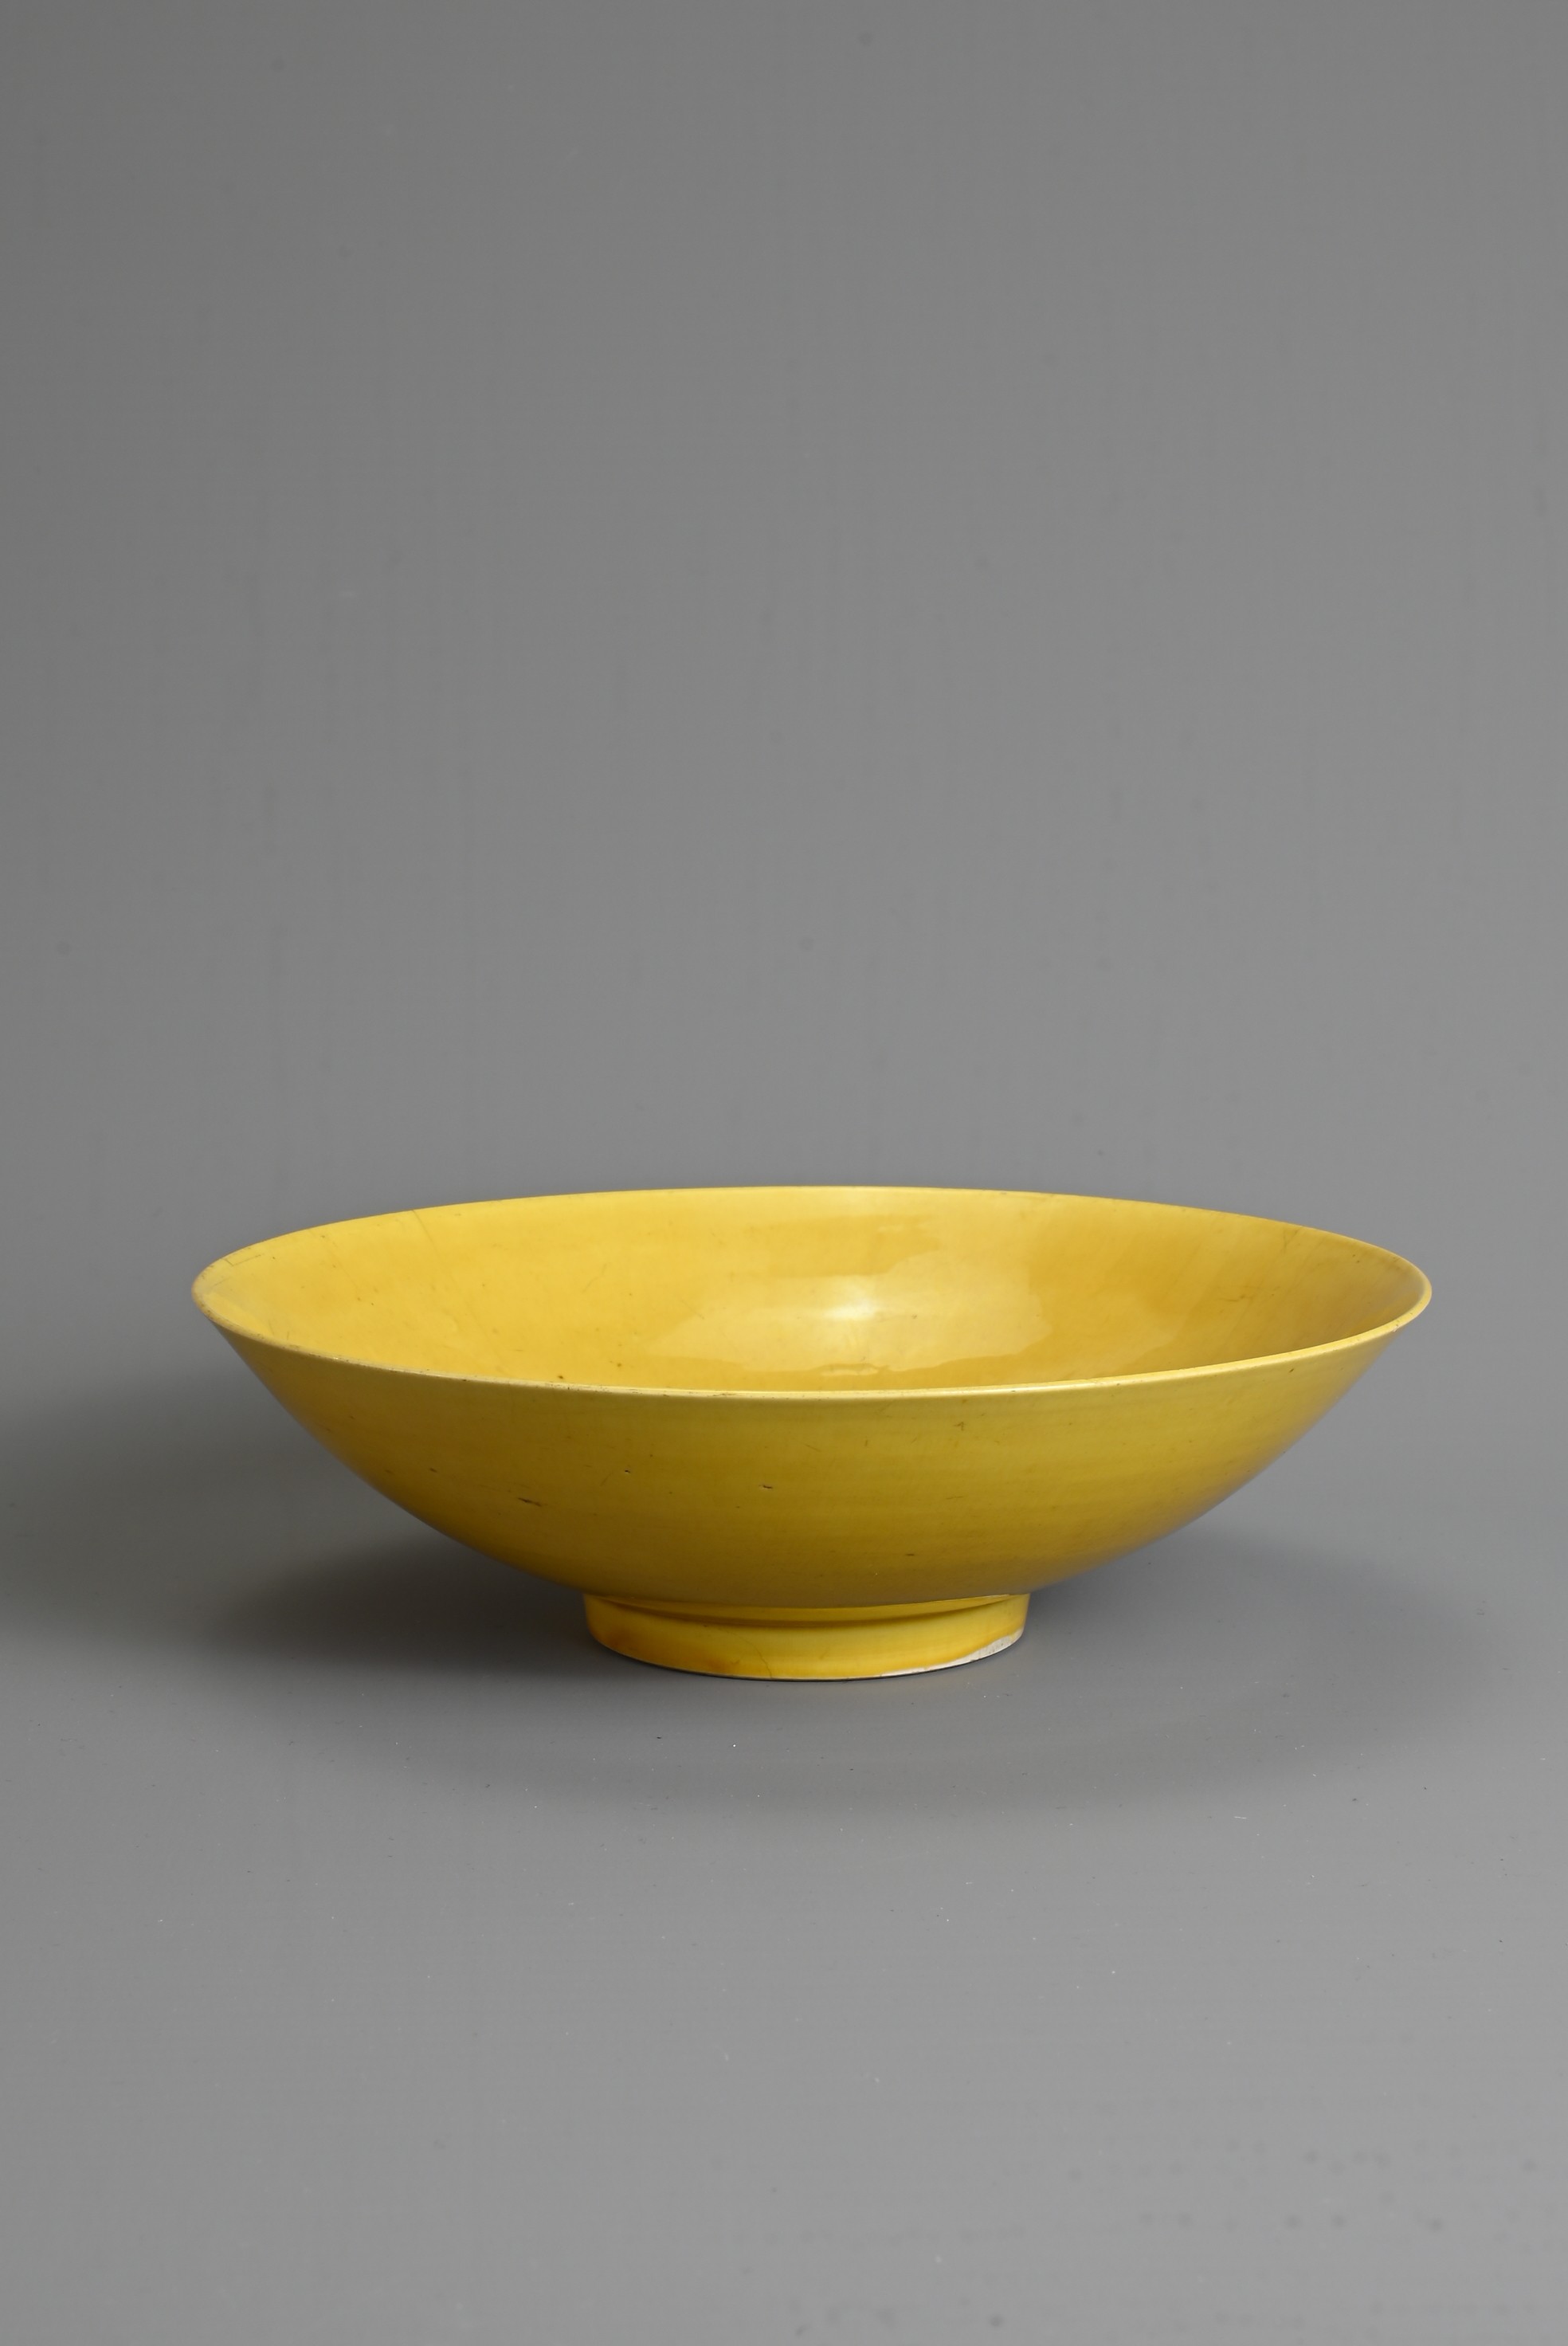 A RARE CHINESE YELLOW GLAZED PORCELAIN SHALLOW BOWL, MARK AND PERIOD OF JIAJING (1522-1566).